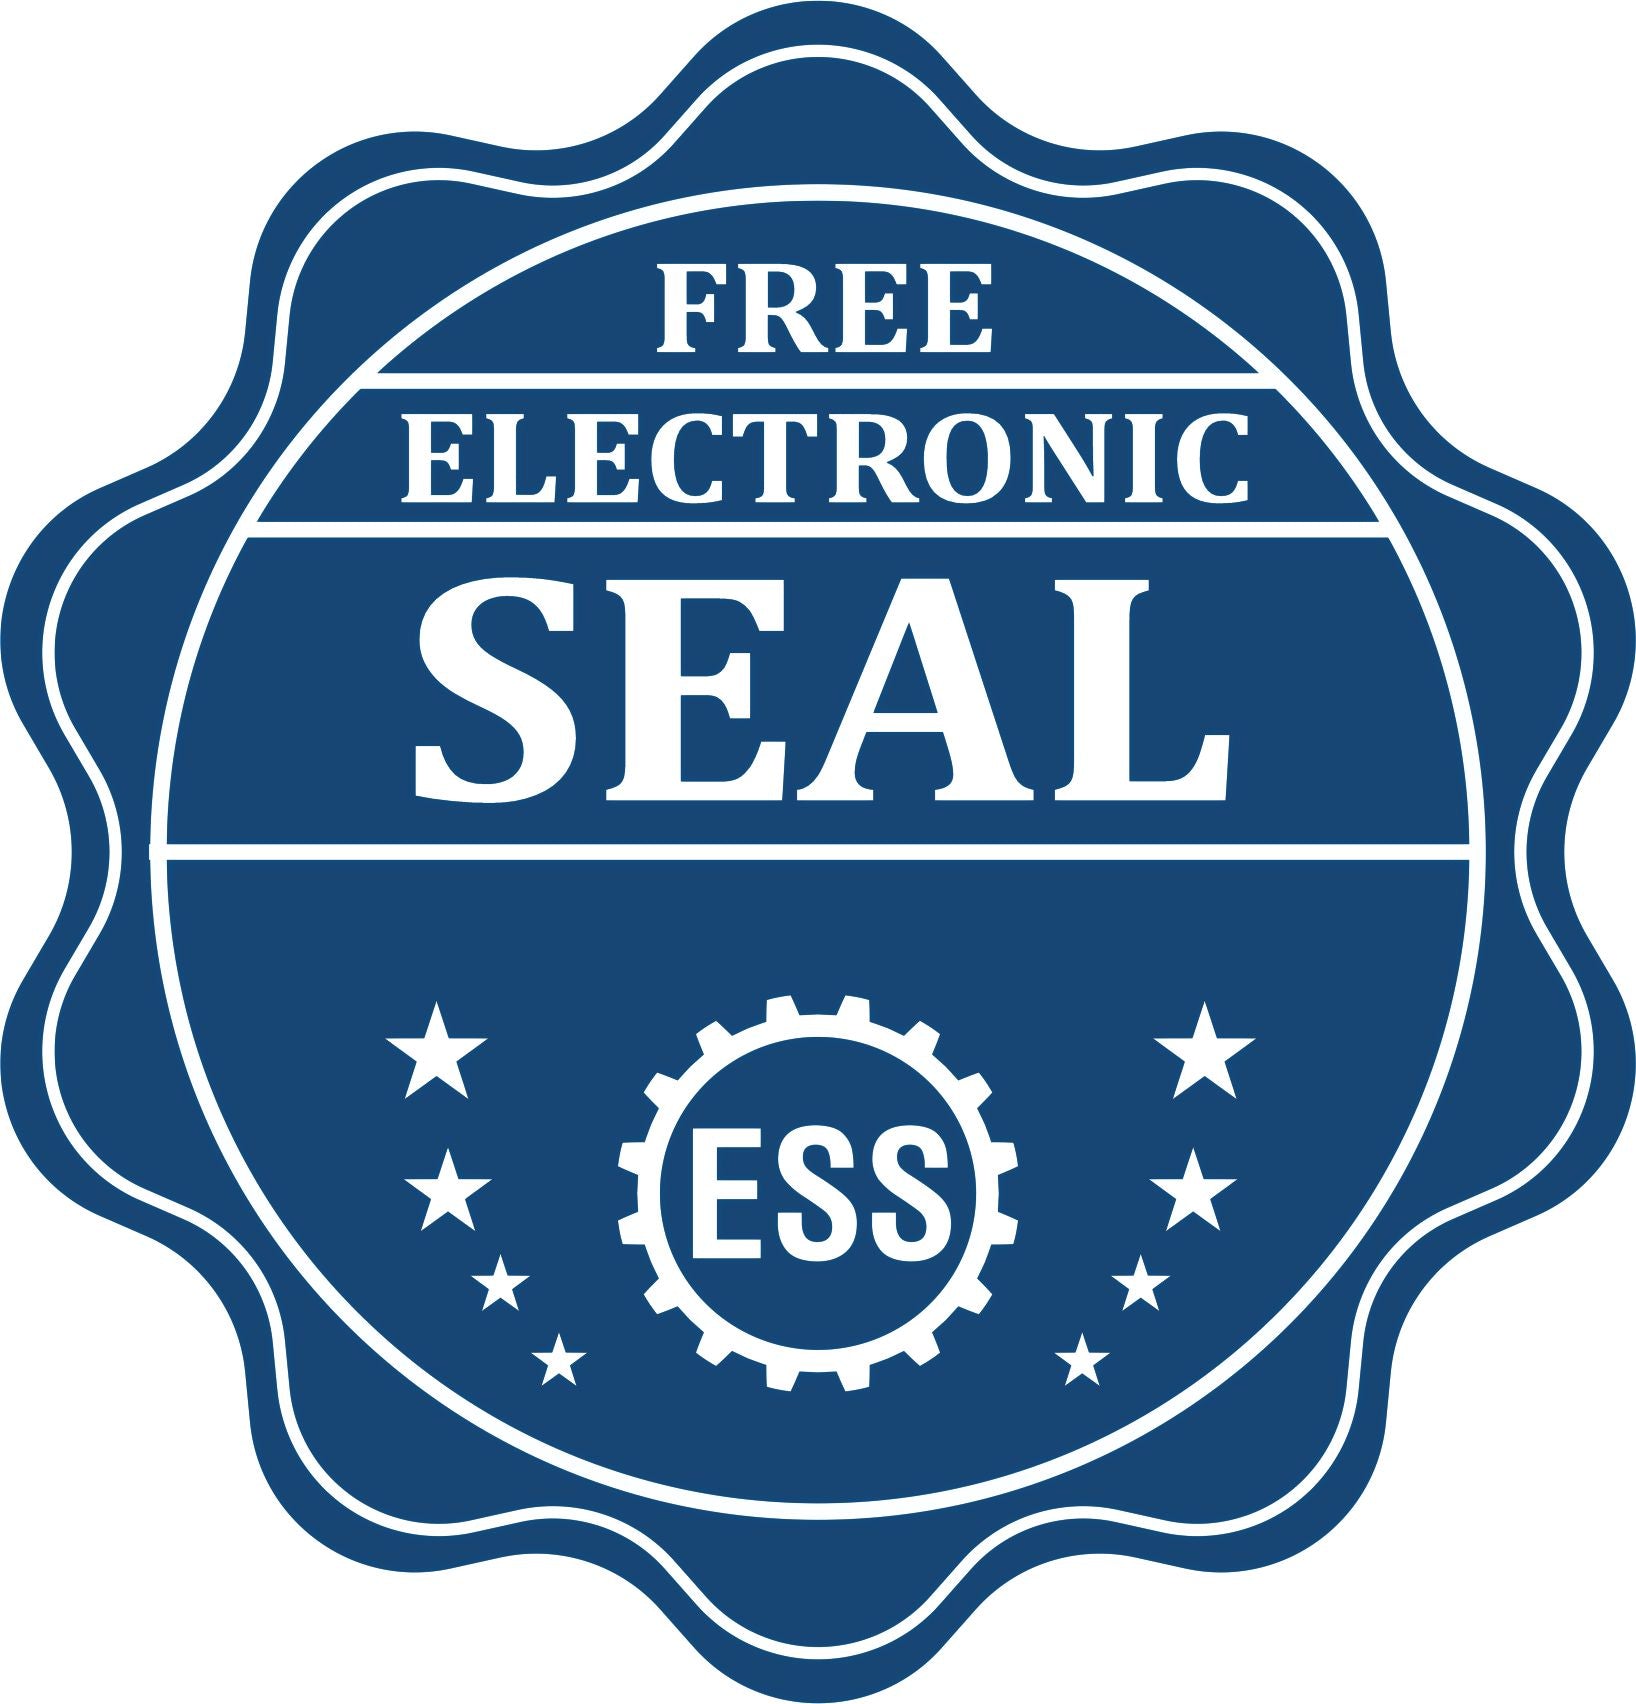 A badge showing a free electronic seal for the Tennessee Desk Landscape Architectural Seal Embosser with stars and the ESS gear on the emblem.